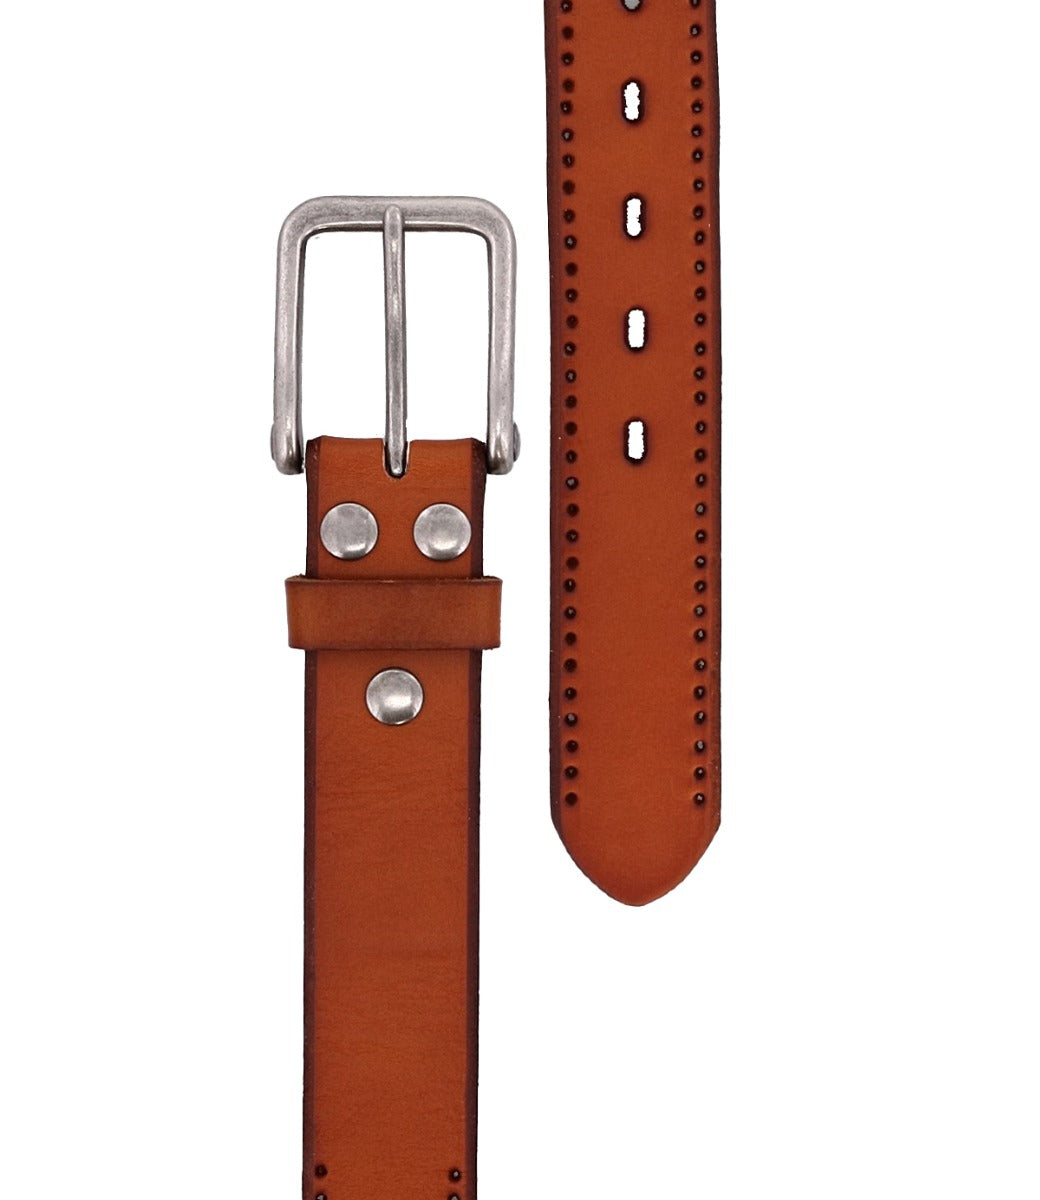 A Watford leather belt by Bed Stu with a silver buckle.